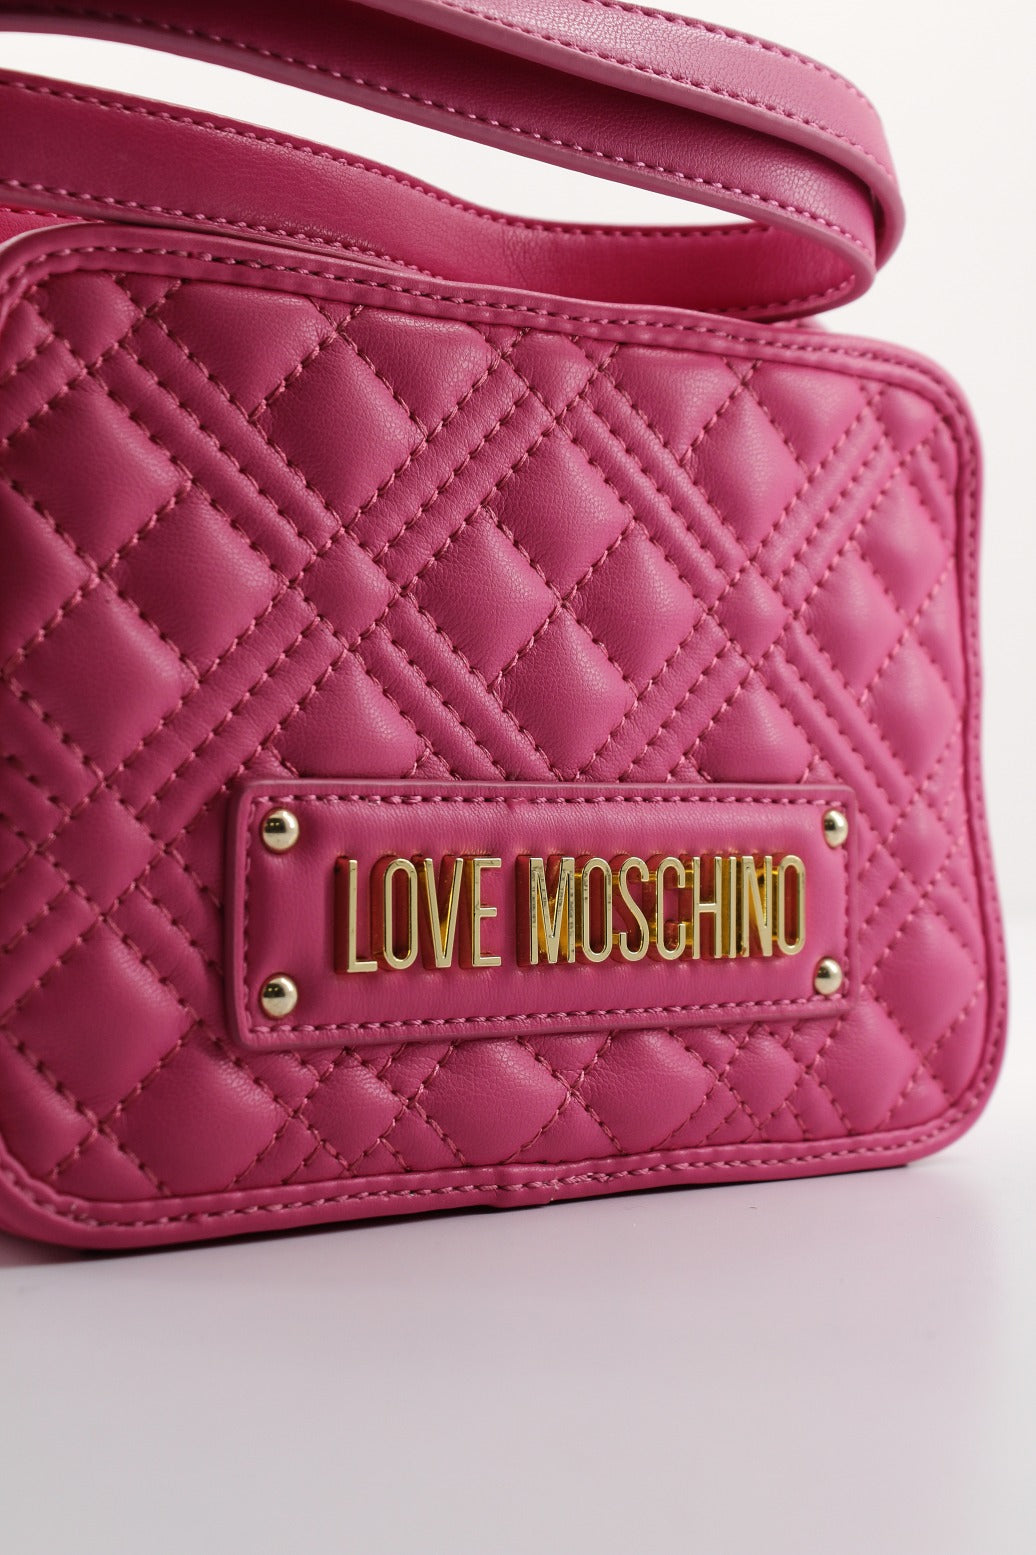 LOVE MOSCHINO BORSA QUILTED en color ROSA  (4)